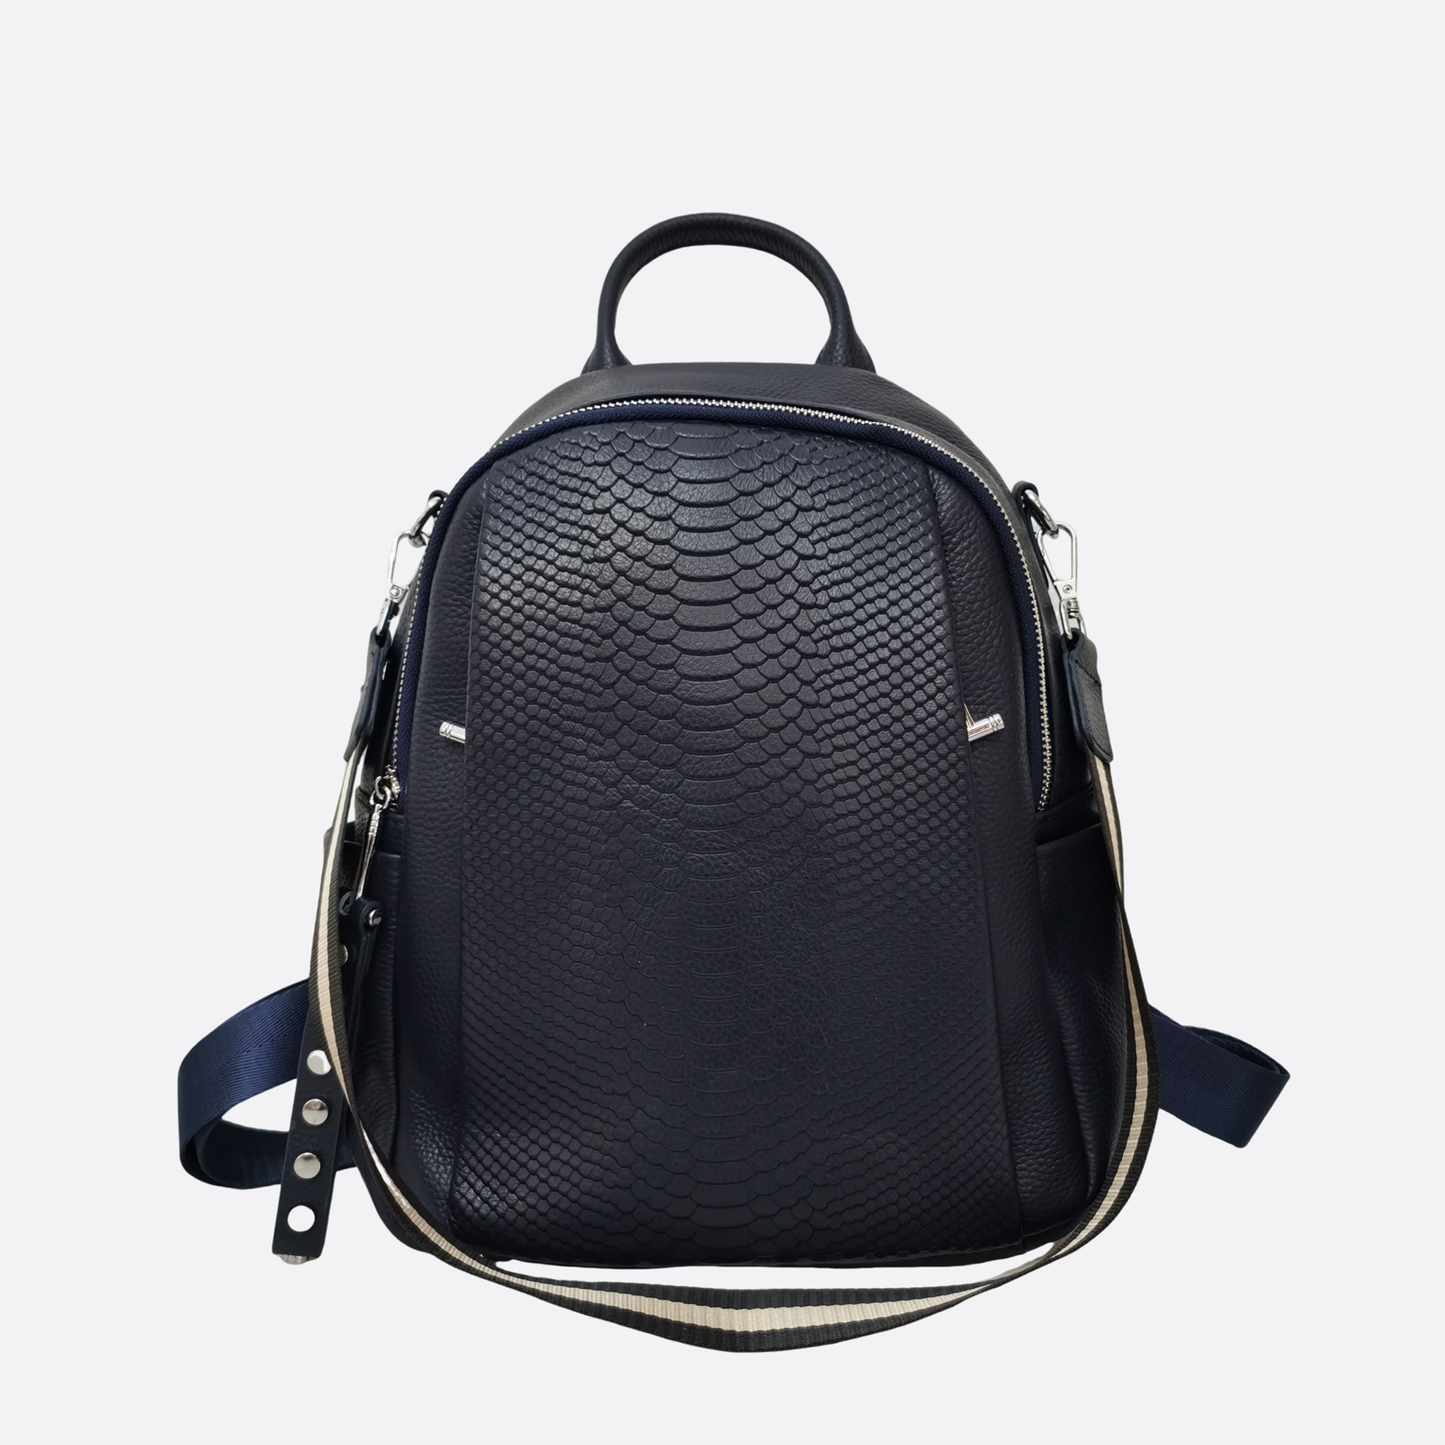 Women's cowhide leather backpack in python print